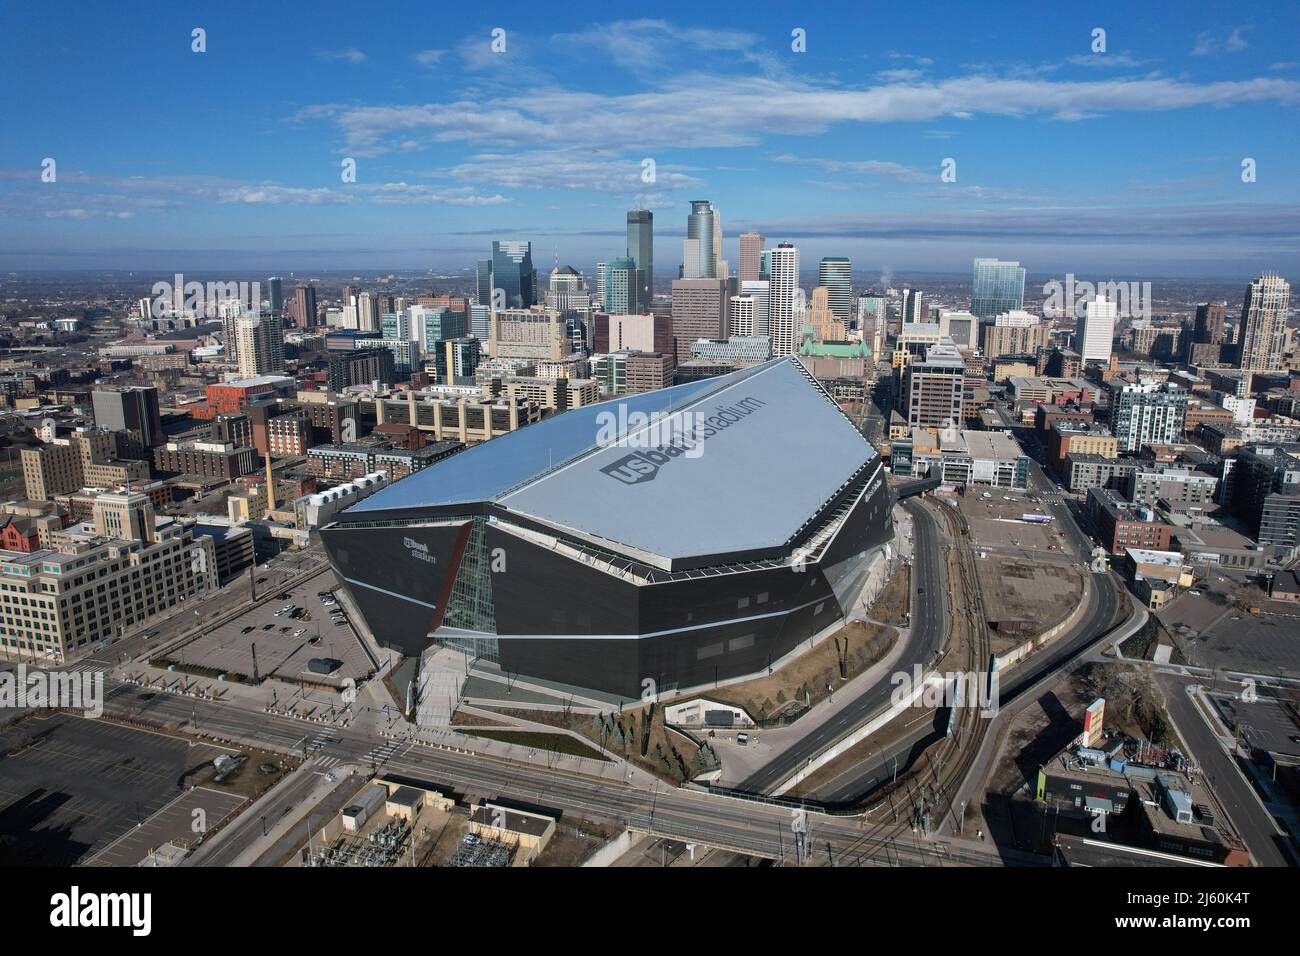 An aerial view of US Bank Stadium, the home of the Minnesota Vikings, Saturday, Apr. 2, 2022, in Minneapolis. Stock Photo